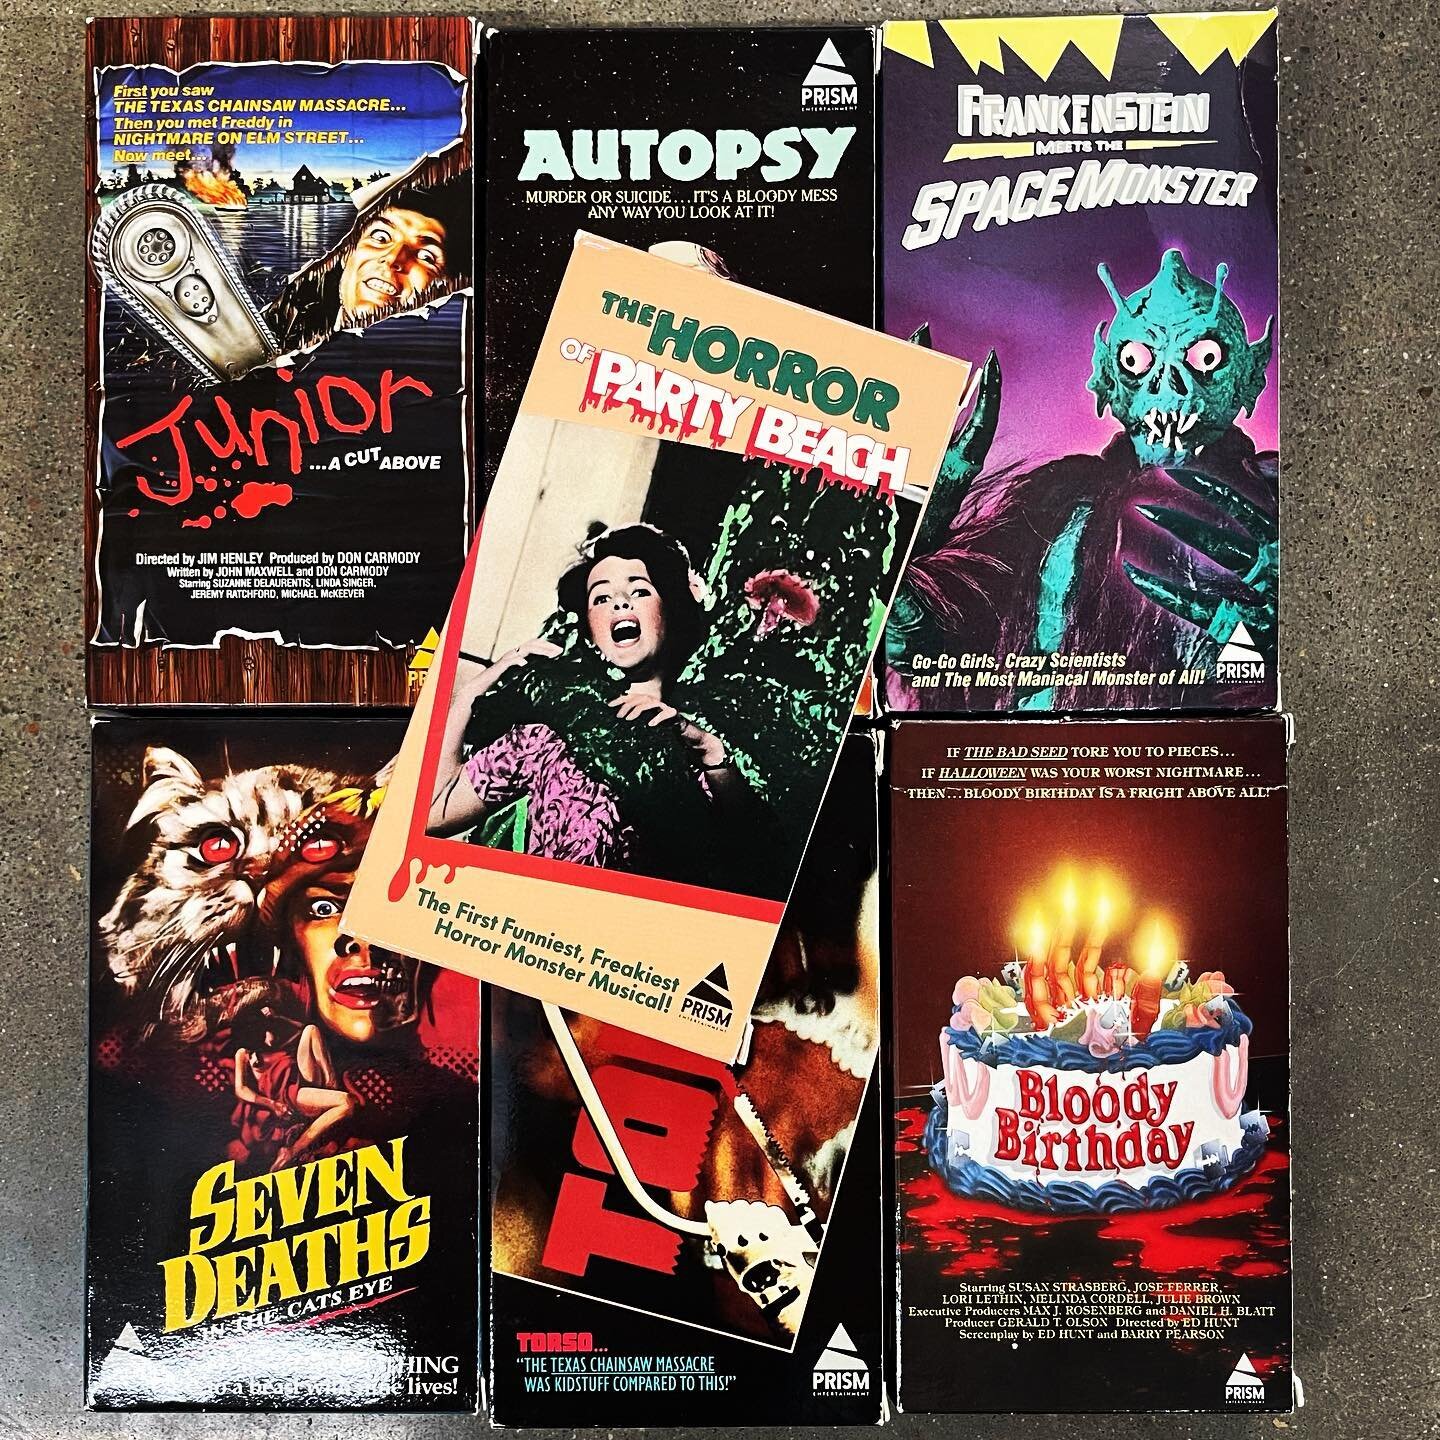 Per usual, we&rsquo;re late to the party! Please accept our first three entries for #vhseptember in one updated post! Thank you and party on!

#vhscollector #videostore #horrorvhs #feedyourvcr